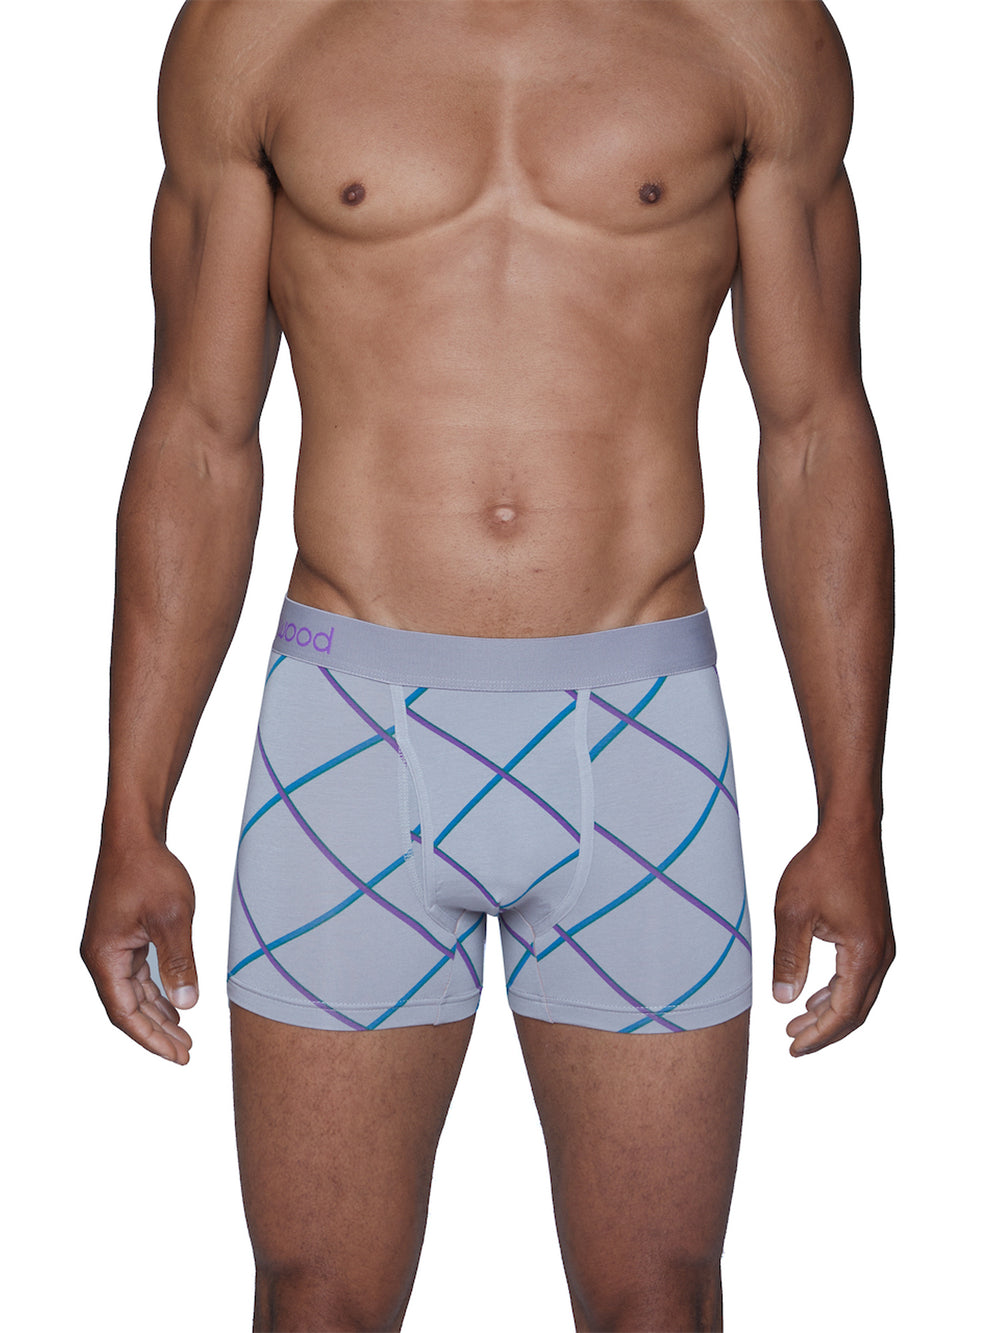 WOOD UNDERWEAR BOXER BRIEF WITH FLY - GREY - CLEARANCE